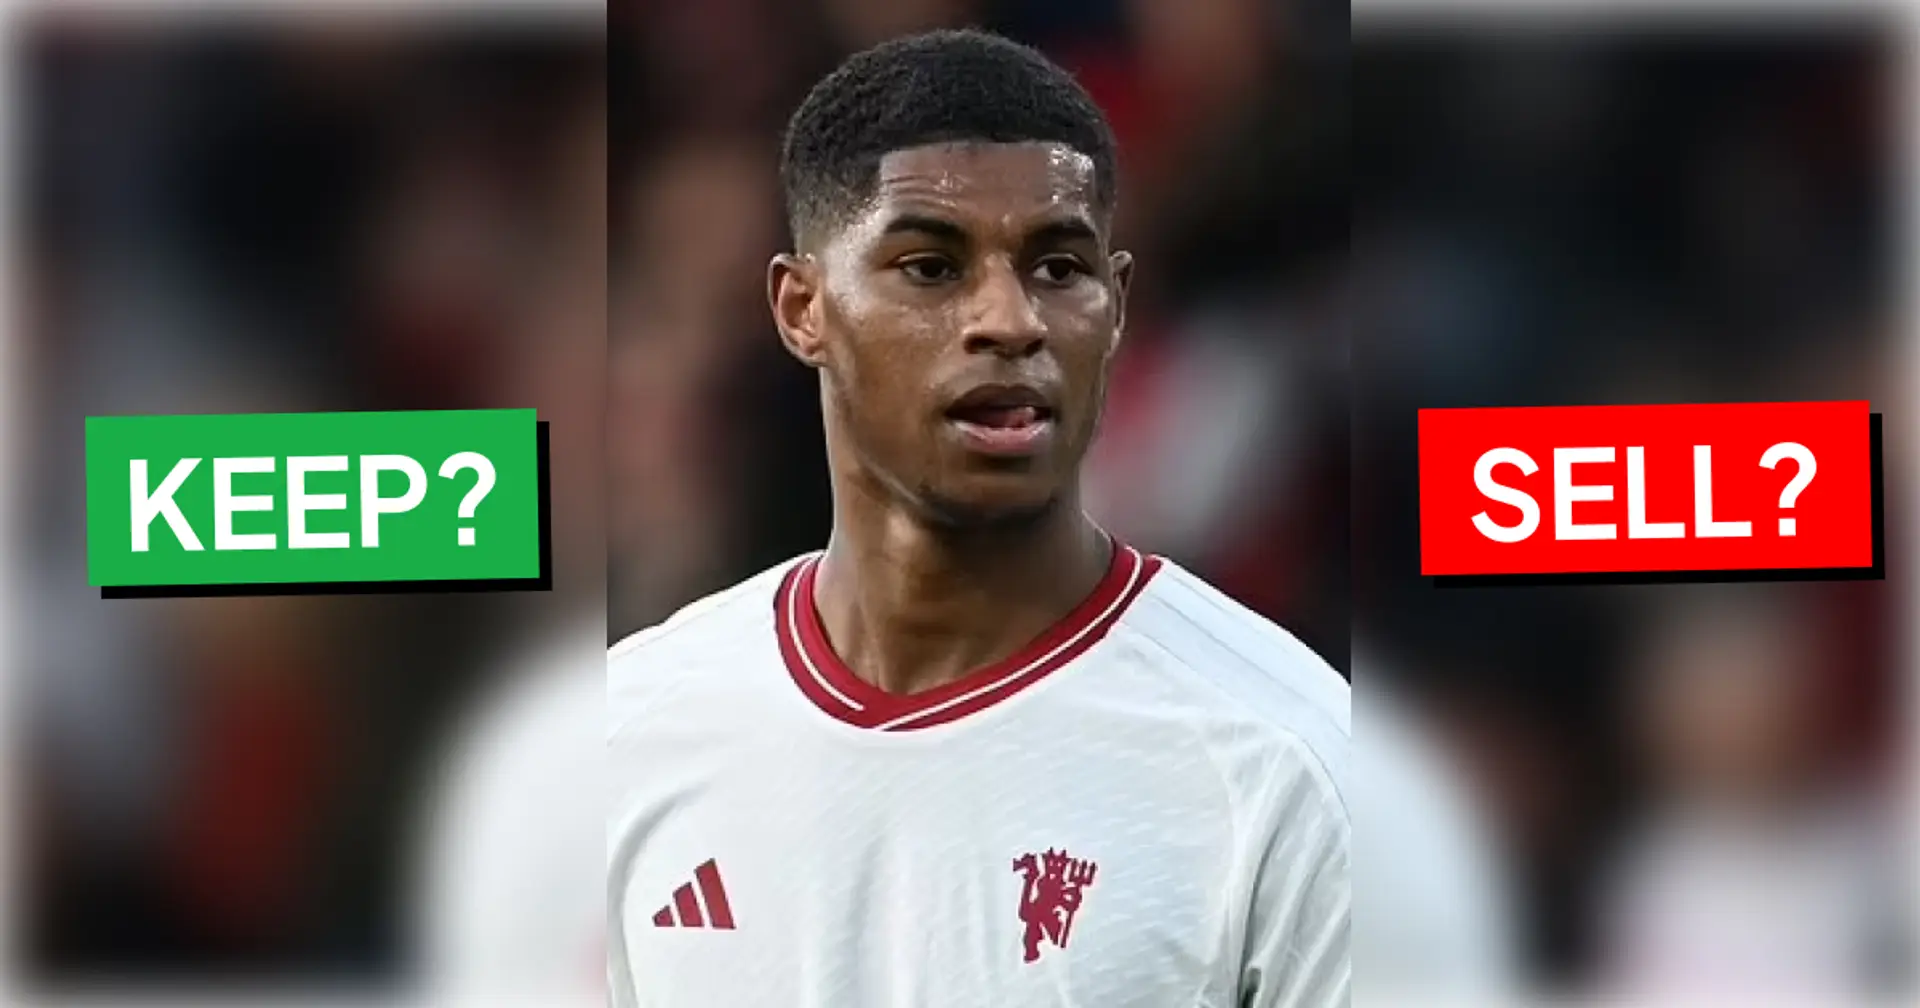 Rashford — keep or sell? Man United fans split on Marcus’ future — have your say in the comments, too